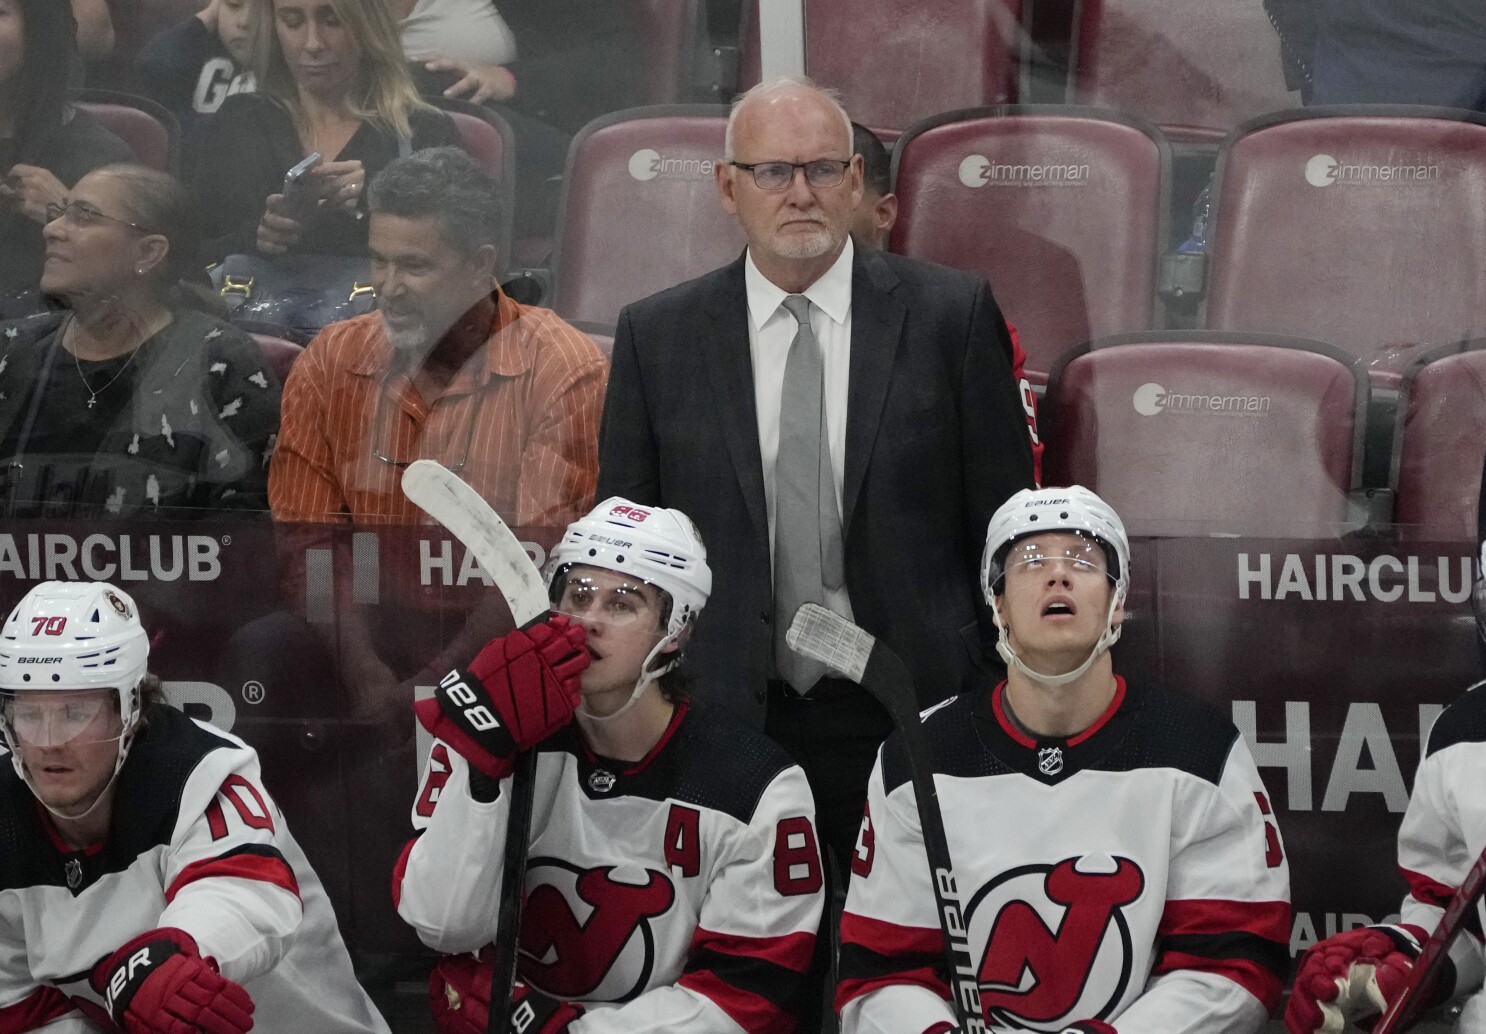 Time is Right for the Devils to be Showcased in Stadium Series